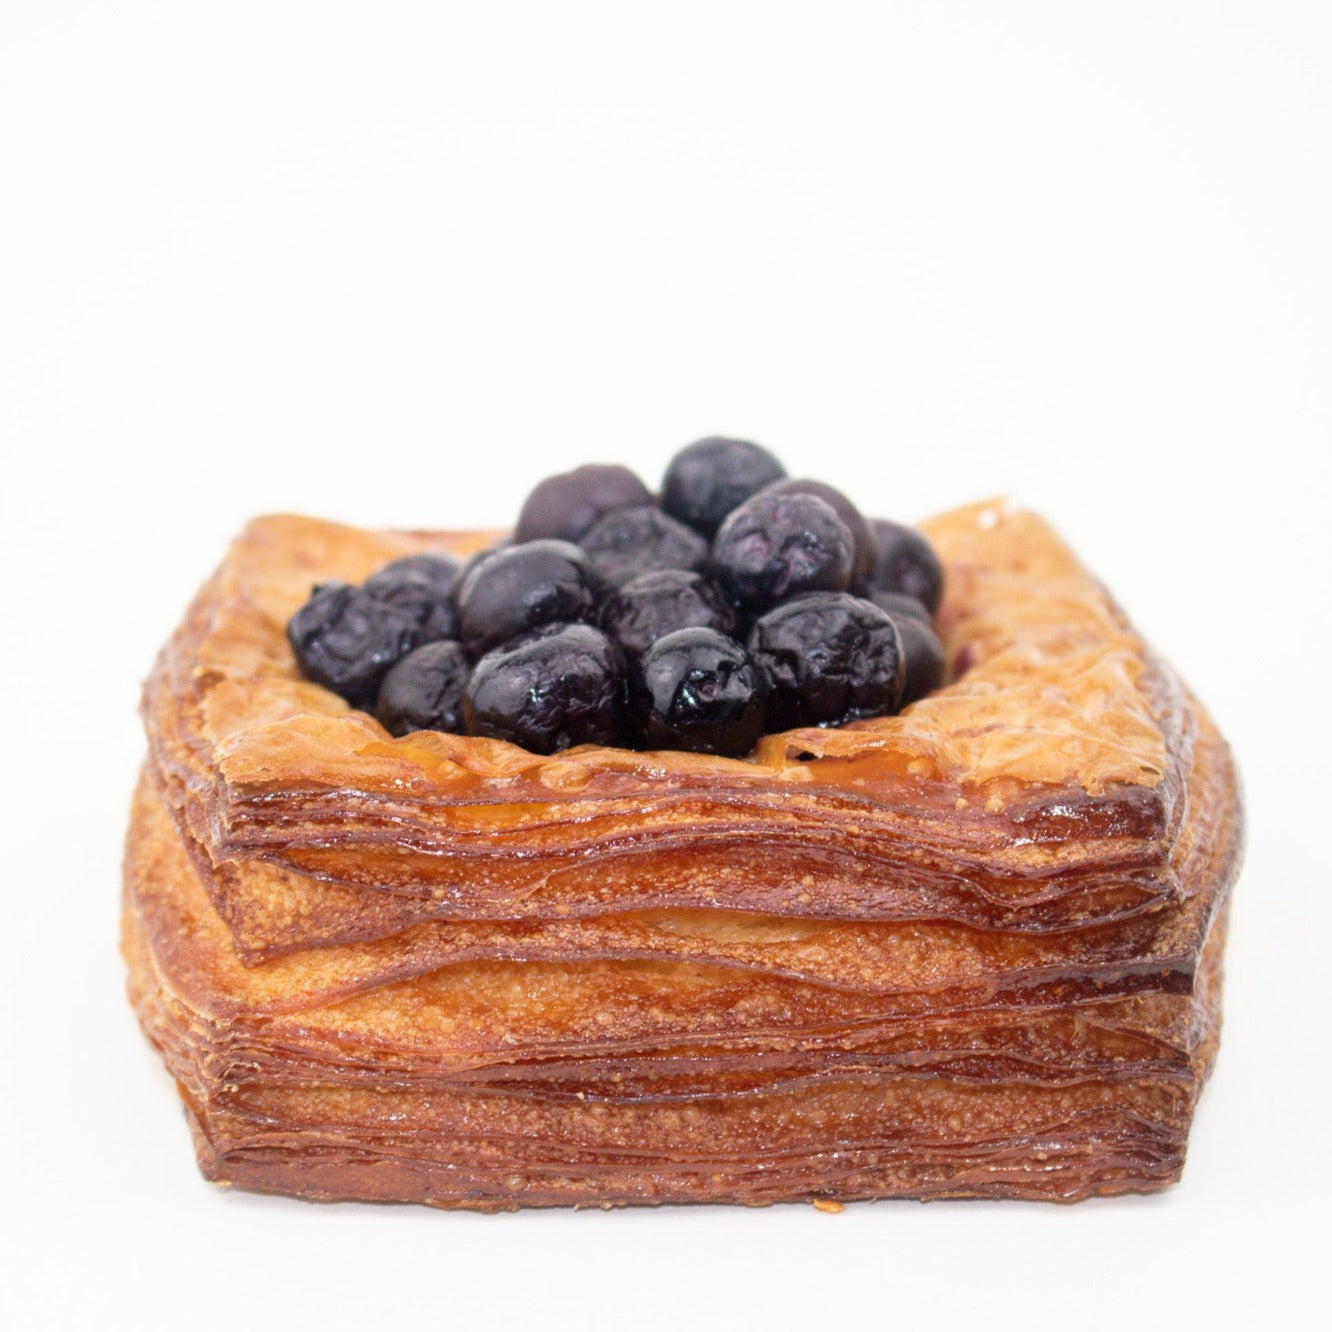 image of the a blueberry danish. many blueberries sit on top of a layered pastry